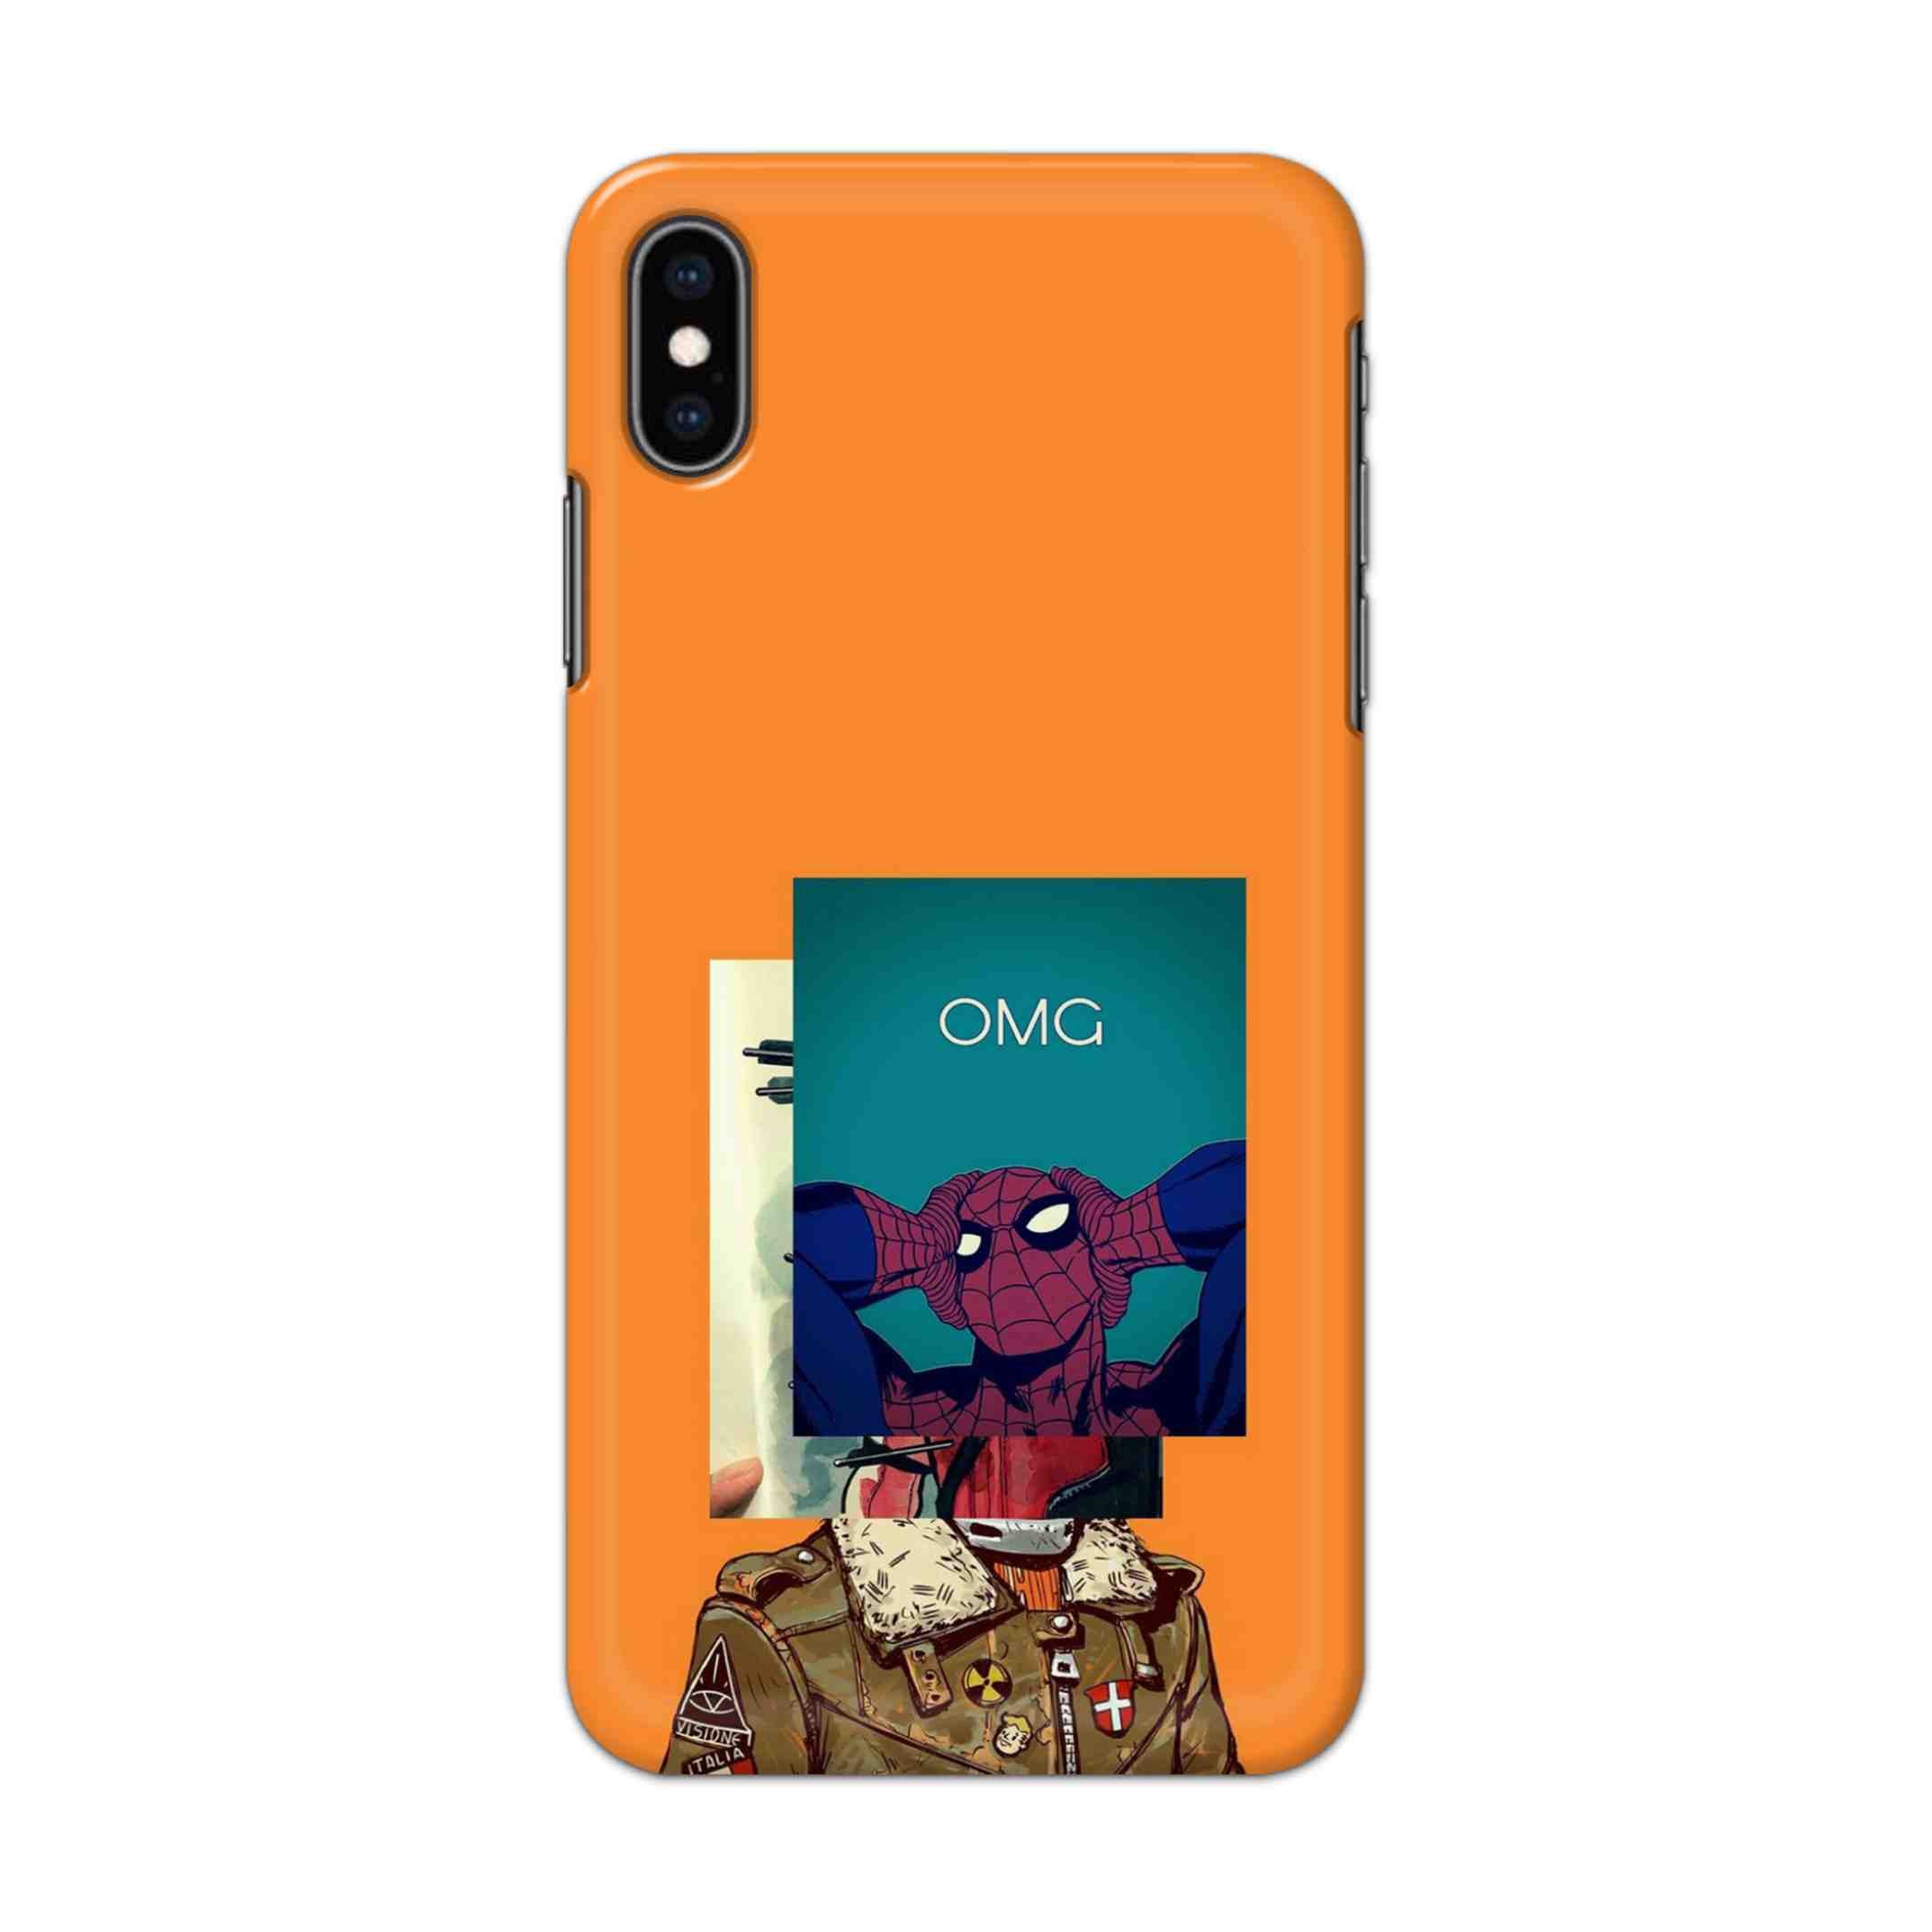 Buy Spiderman 2 Hard Back Mobile Phone Case/Cover For iPhone XS MAX Online